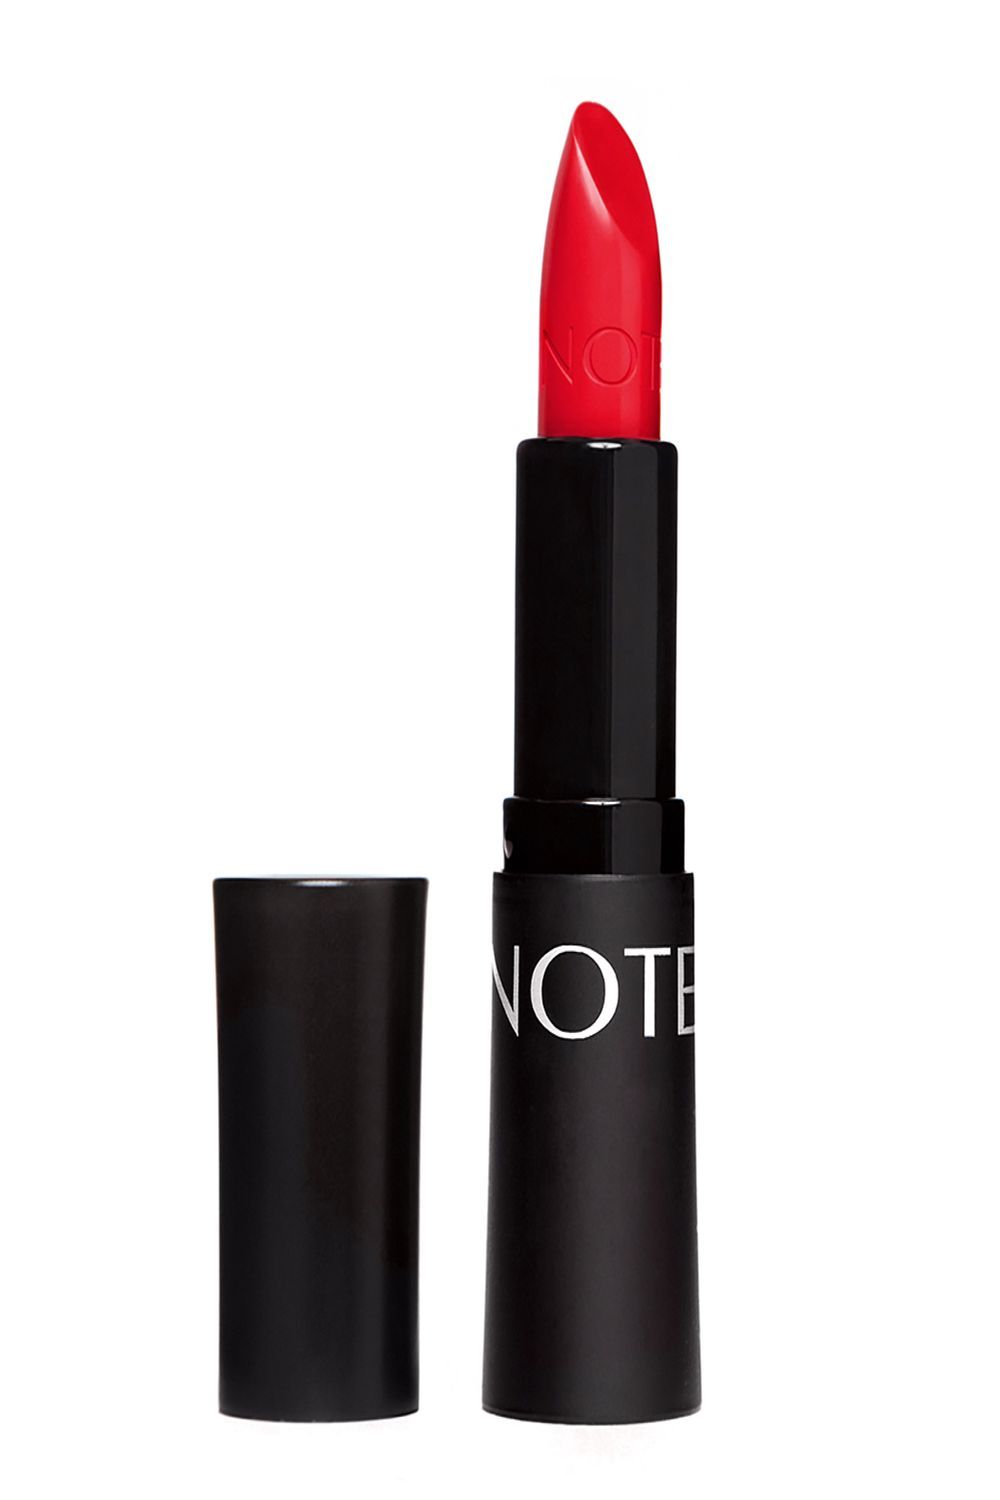 Buy NOTE ULTRA RICH COLOR LIPSTICK 19(Ginger Flower) - Purplle